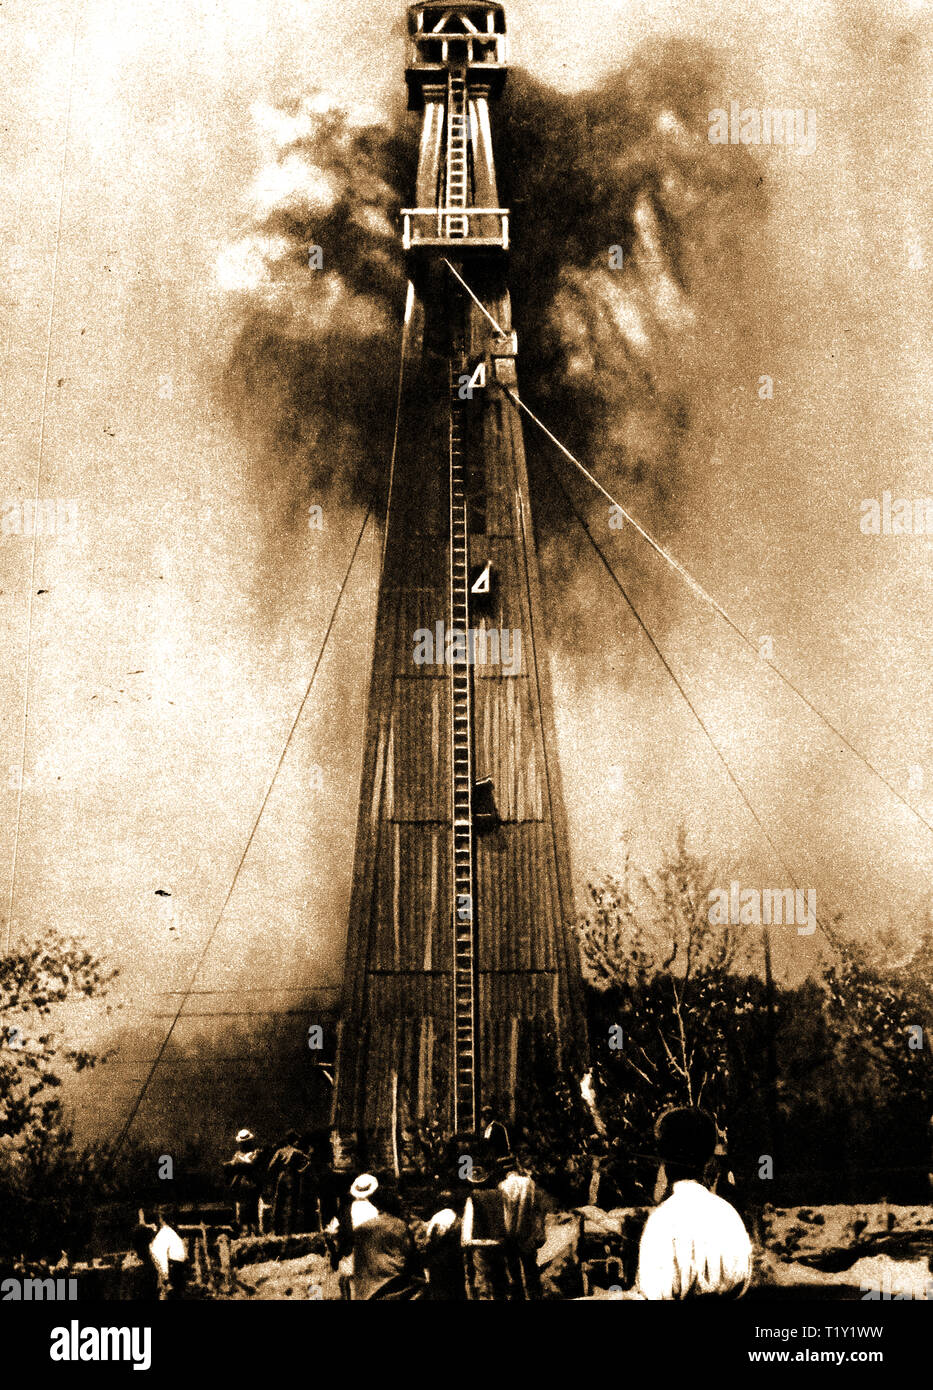 Rumanian Oil industry -Circa 1930's - A  rare photograph of a hand-dug petroleum bore-hole in Rumania, encased in wood and secured with guy ropes(Romania was the largest European producer of oil in World War II. Later in 1943 installations were bombed by the USA in 'Operation Tidal Wave' Stock Photo